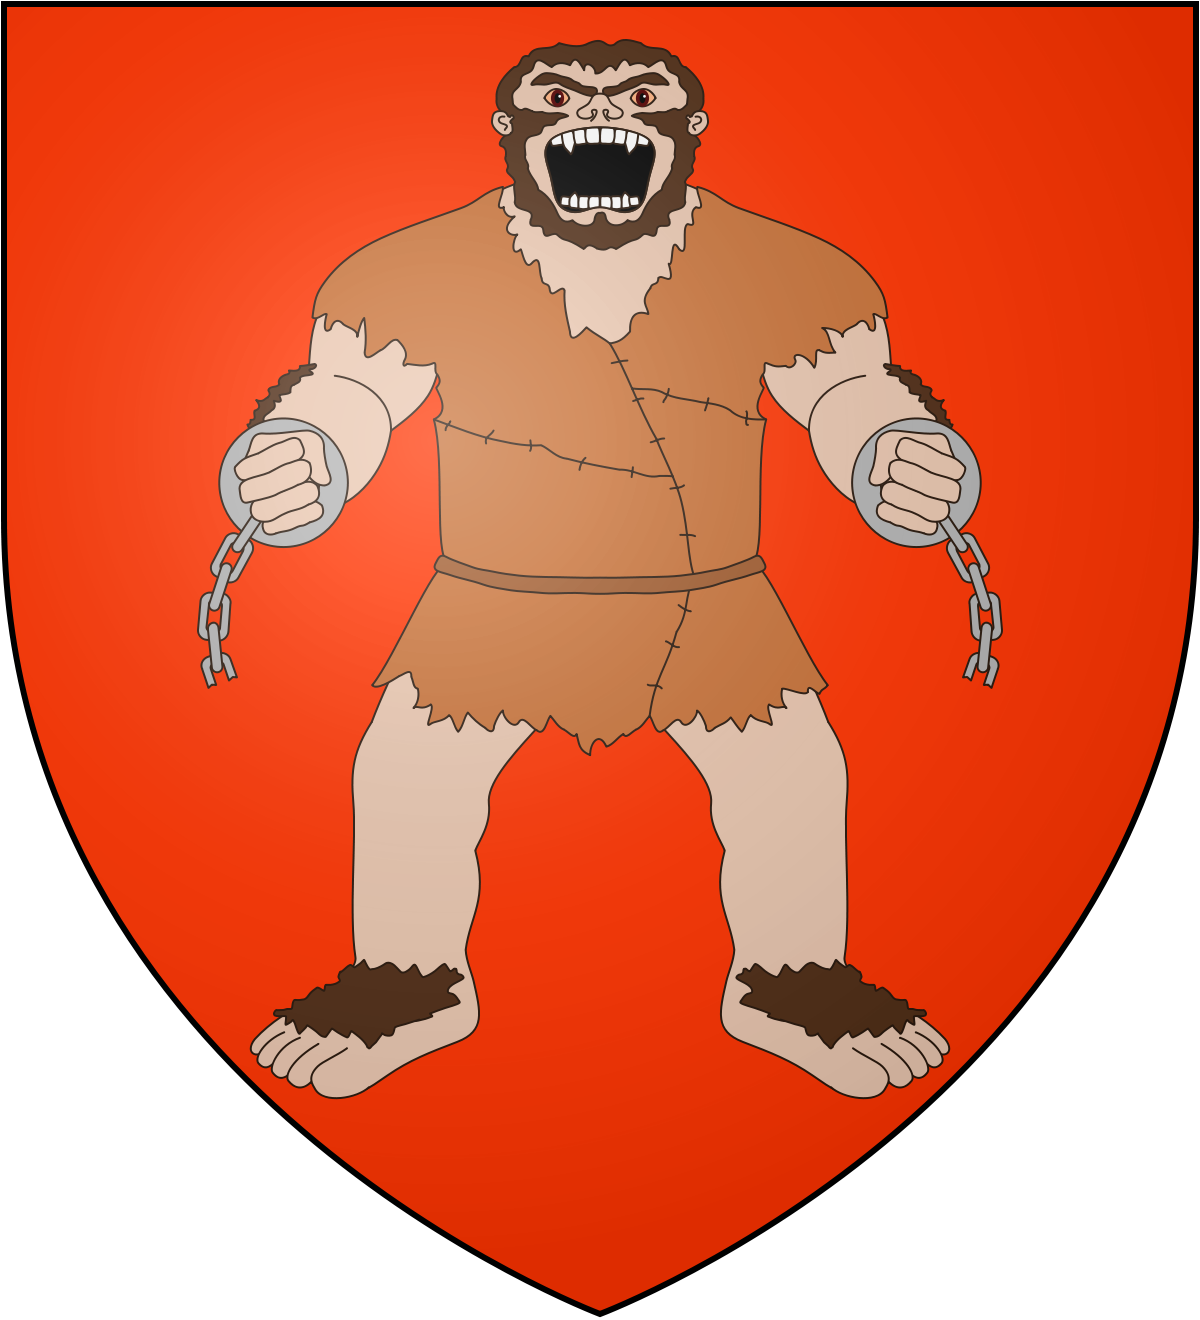 Jon Umber (son of Jon) - A Wiki of Ice and Fire